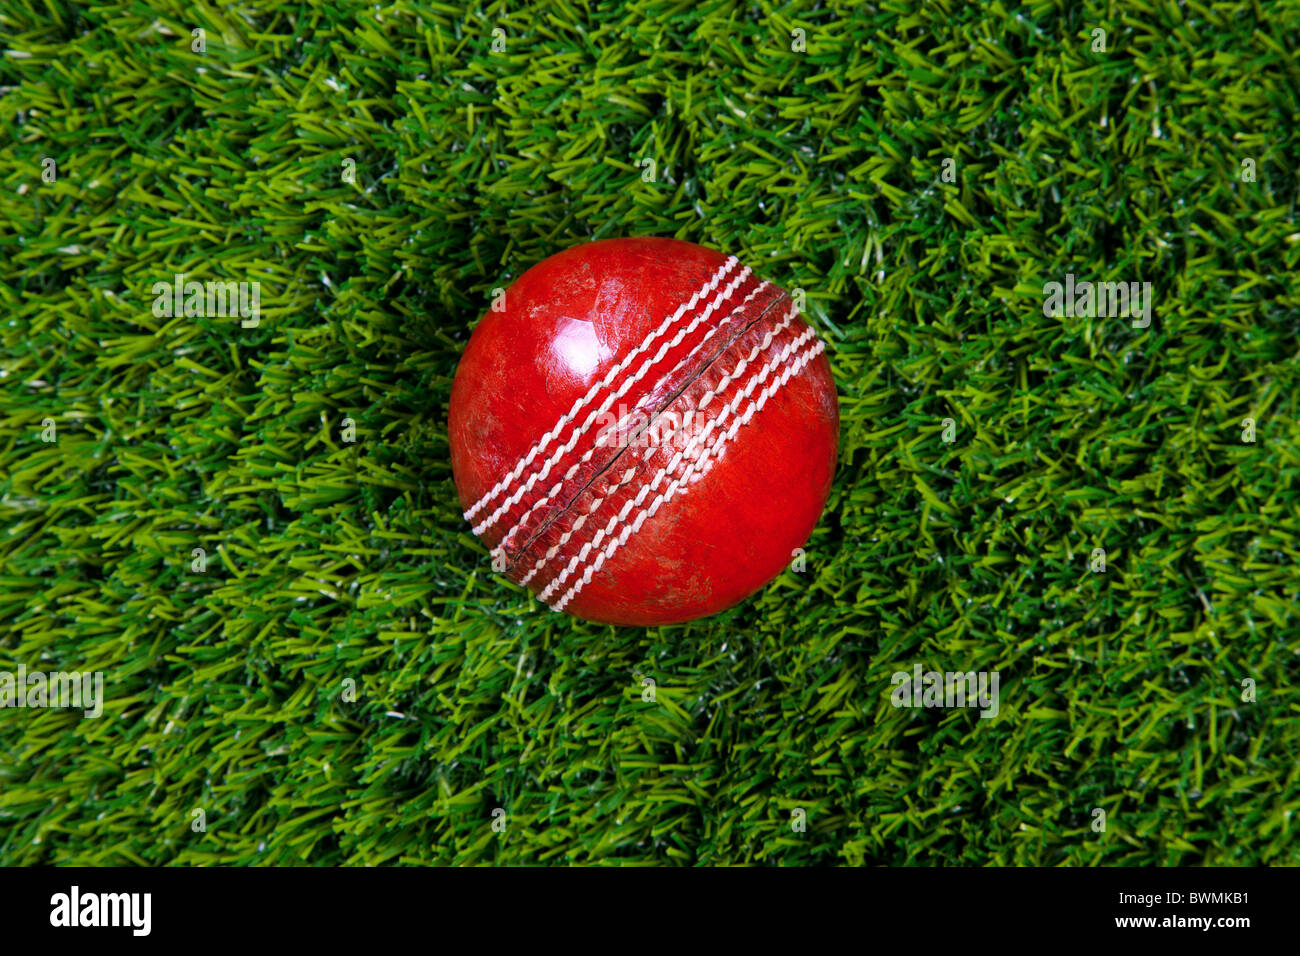 Photo of a red leather cricket ball with stitched seams on grass Stock Photo